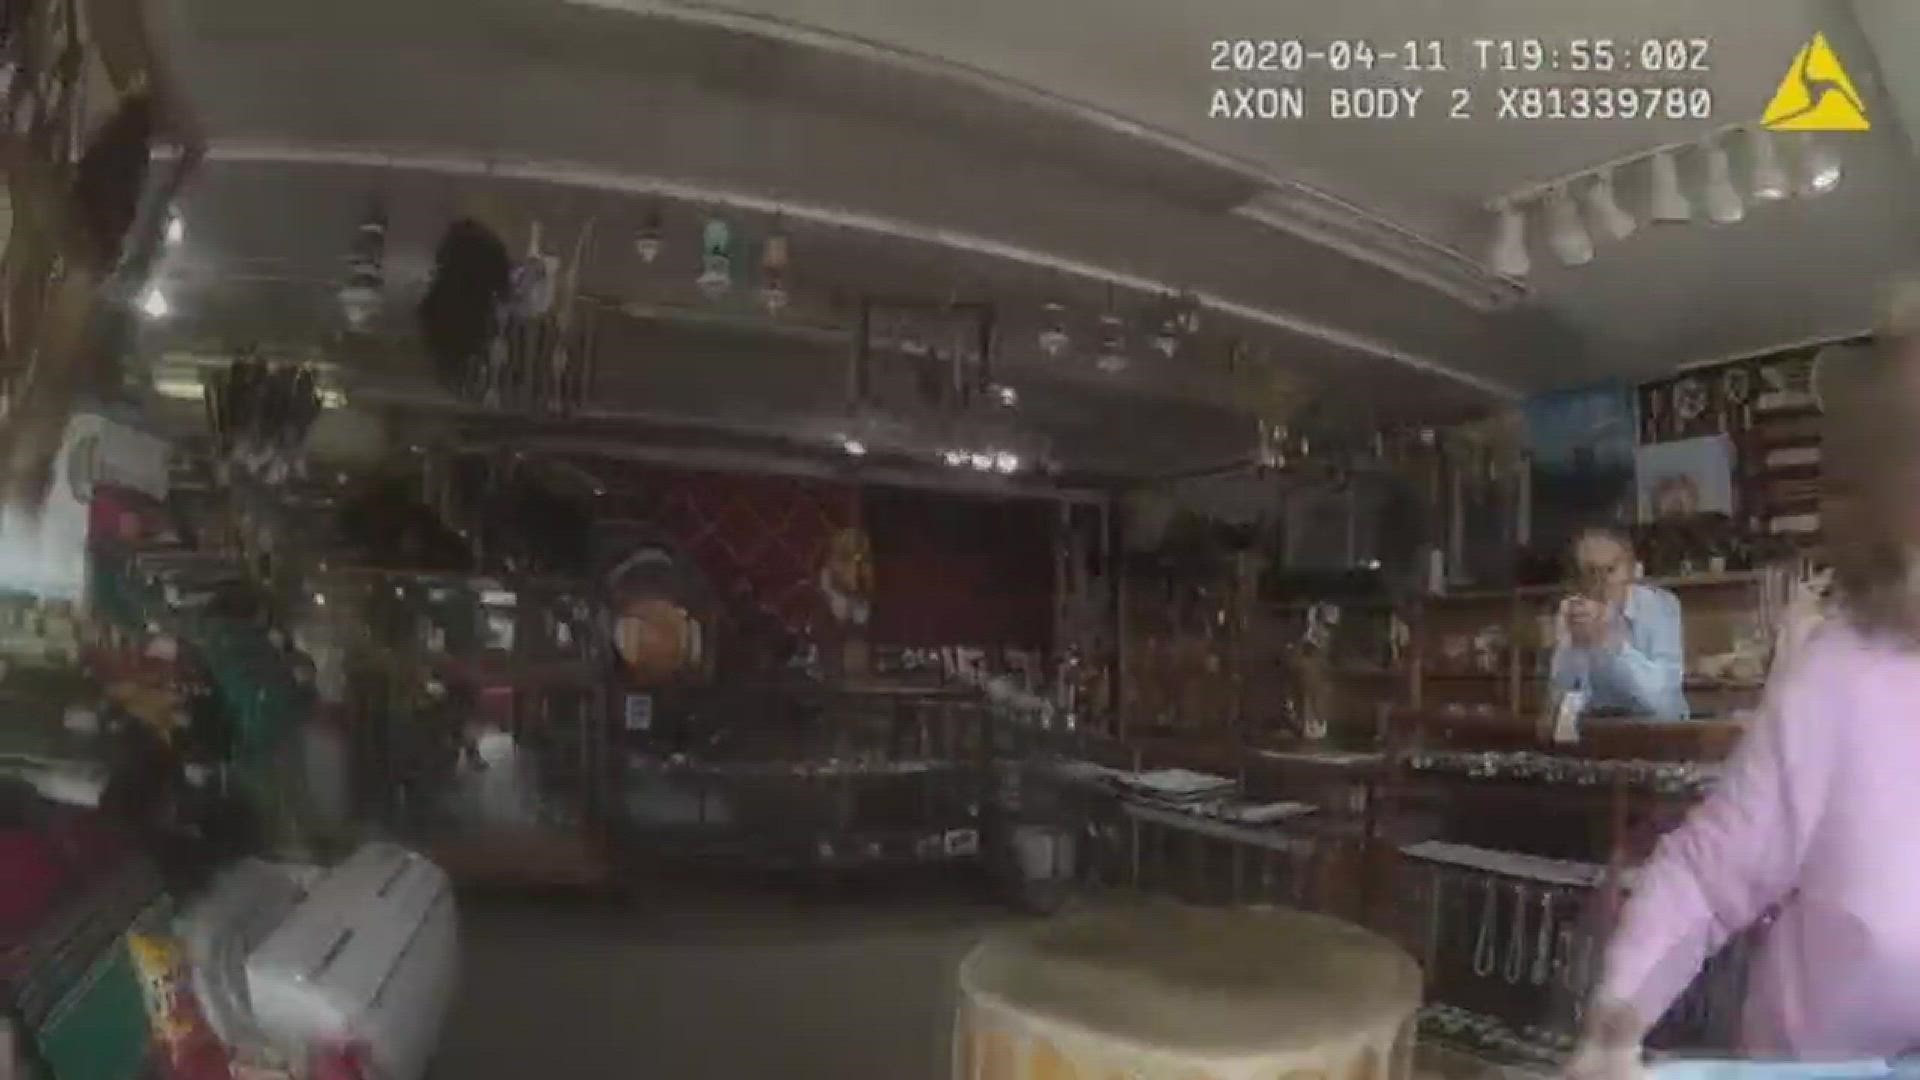 Winslow police released body camera footage of them citing a man for keeping a non-essential business open during the pandemic.